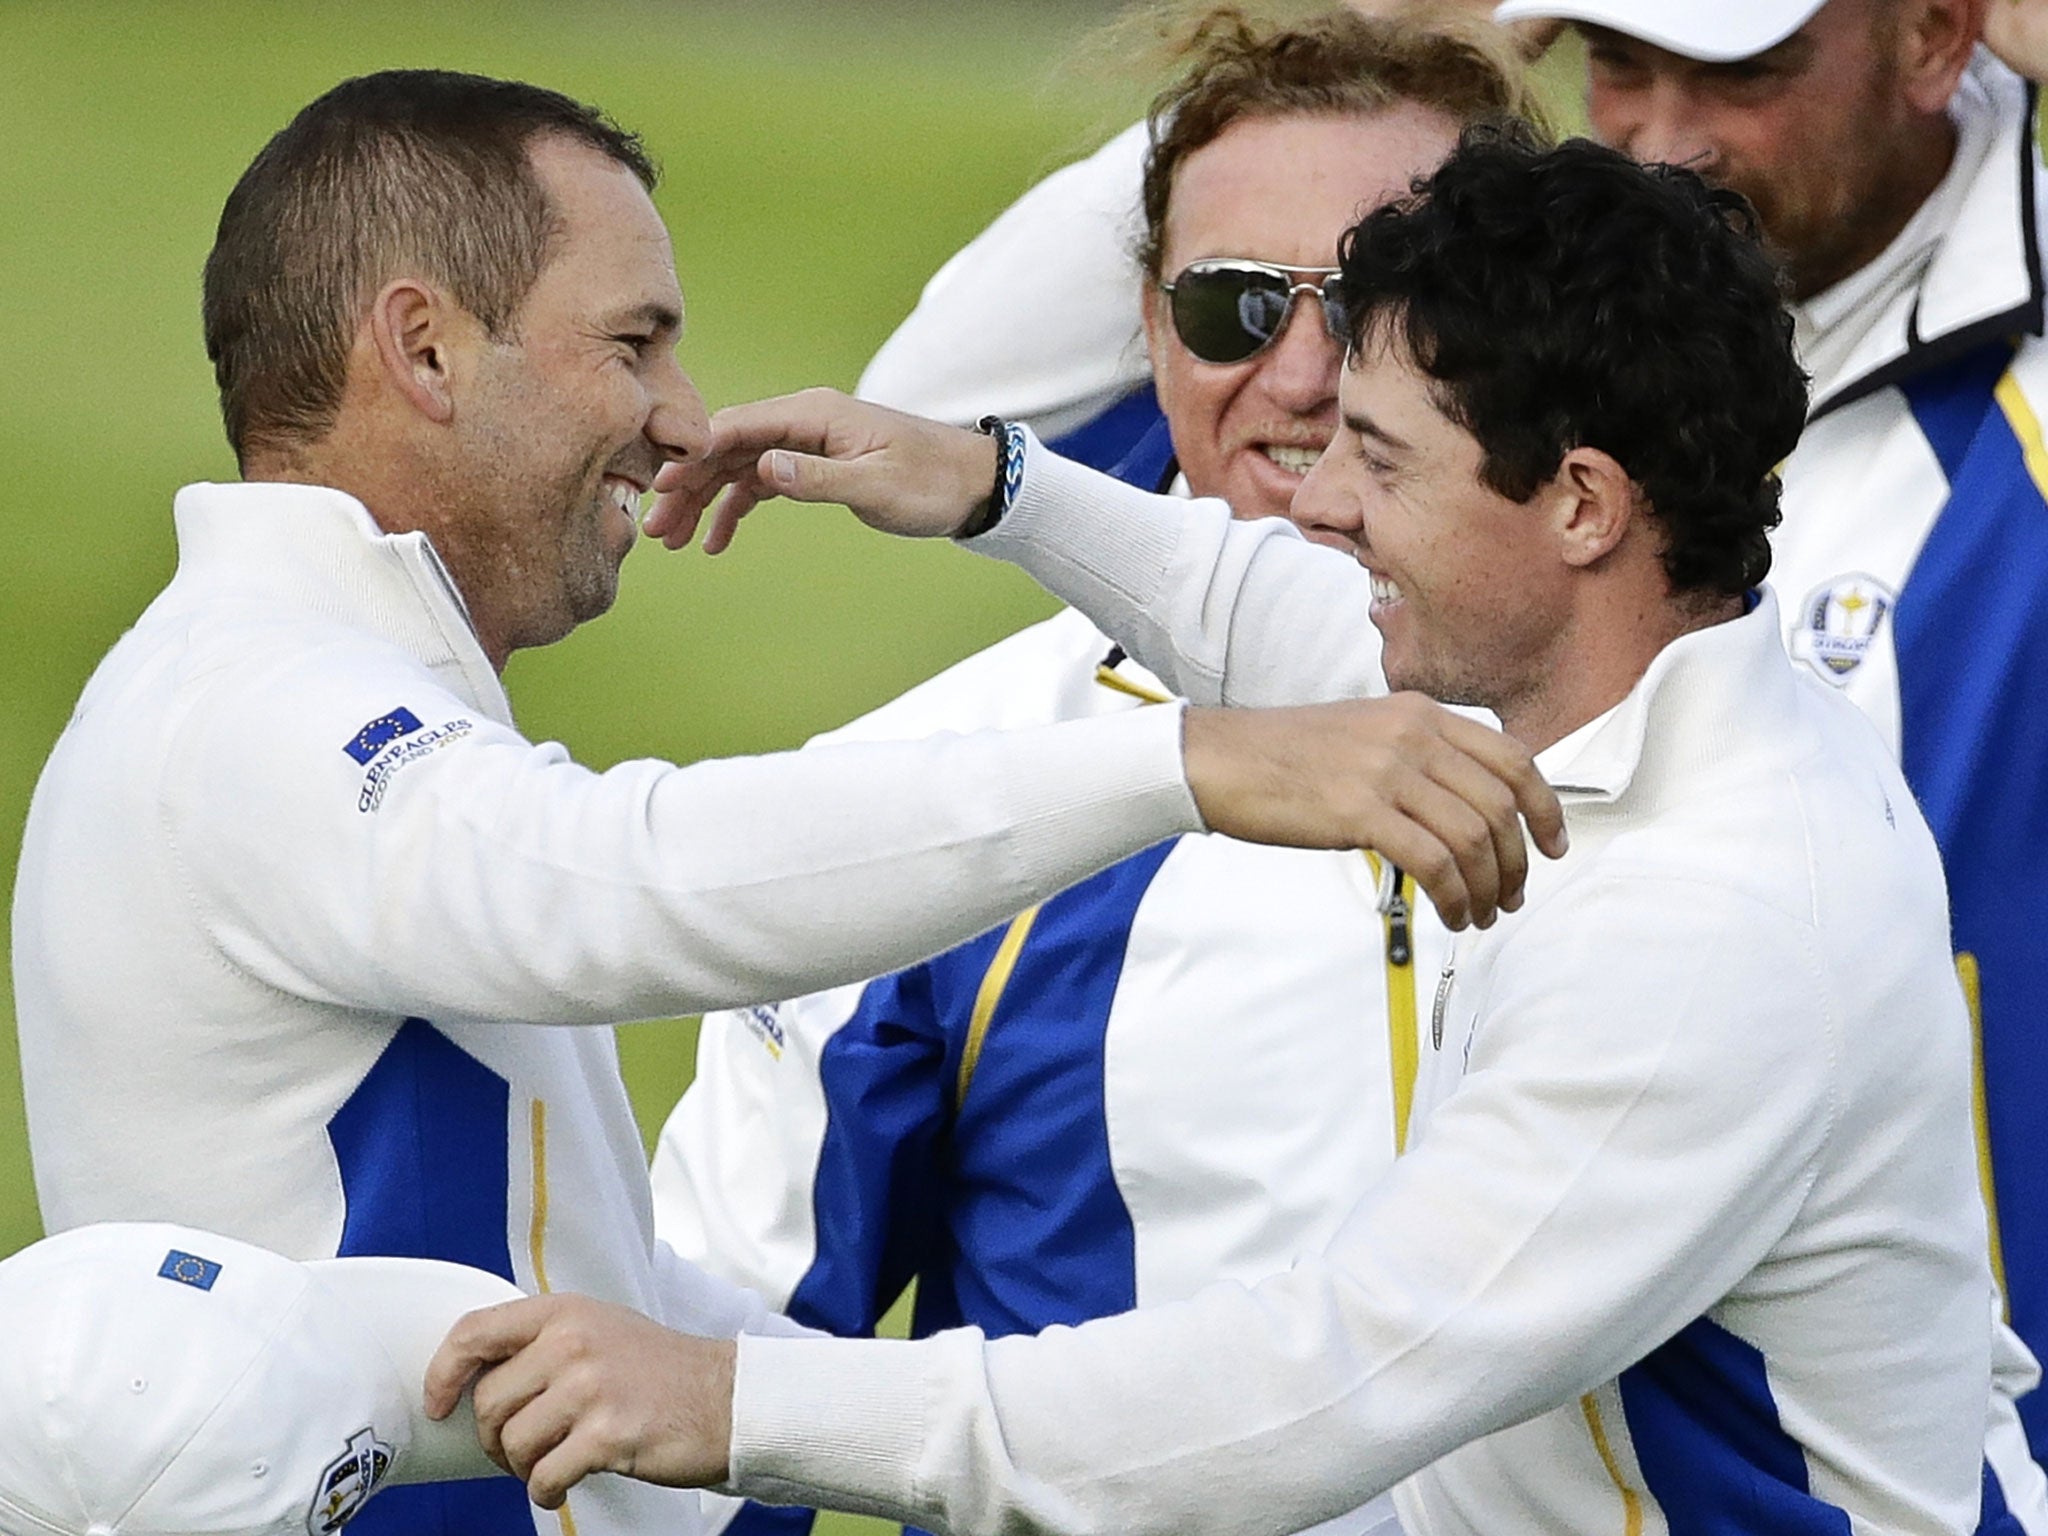 Sergio Garcia and Rory McIlroy embrace after beating Jim Furyk and Hunter Mahan